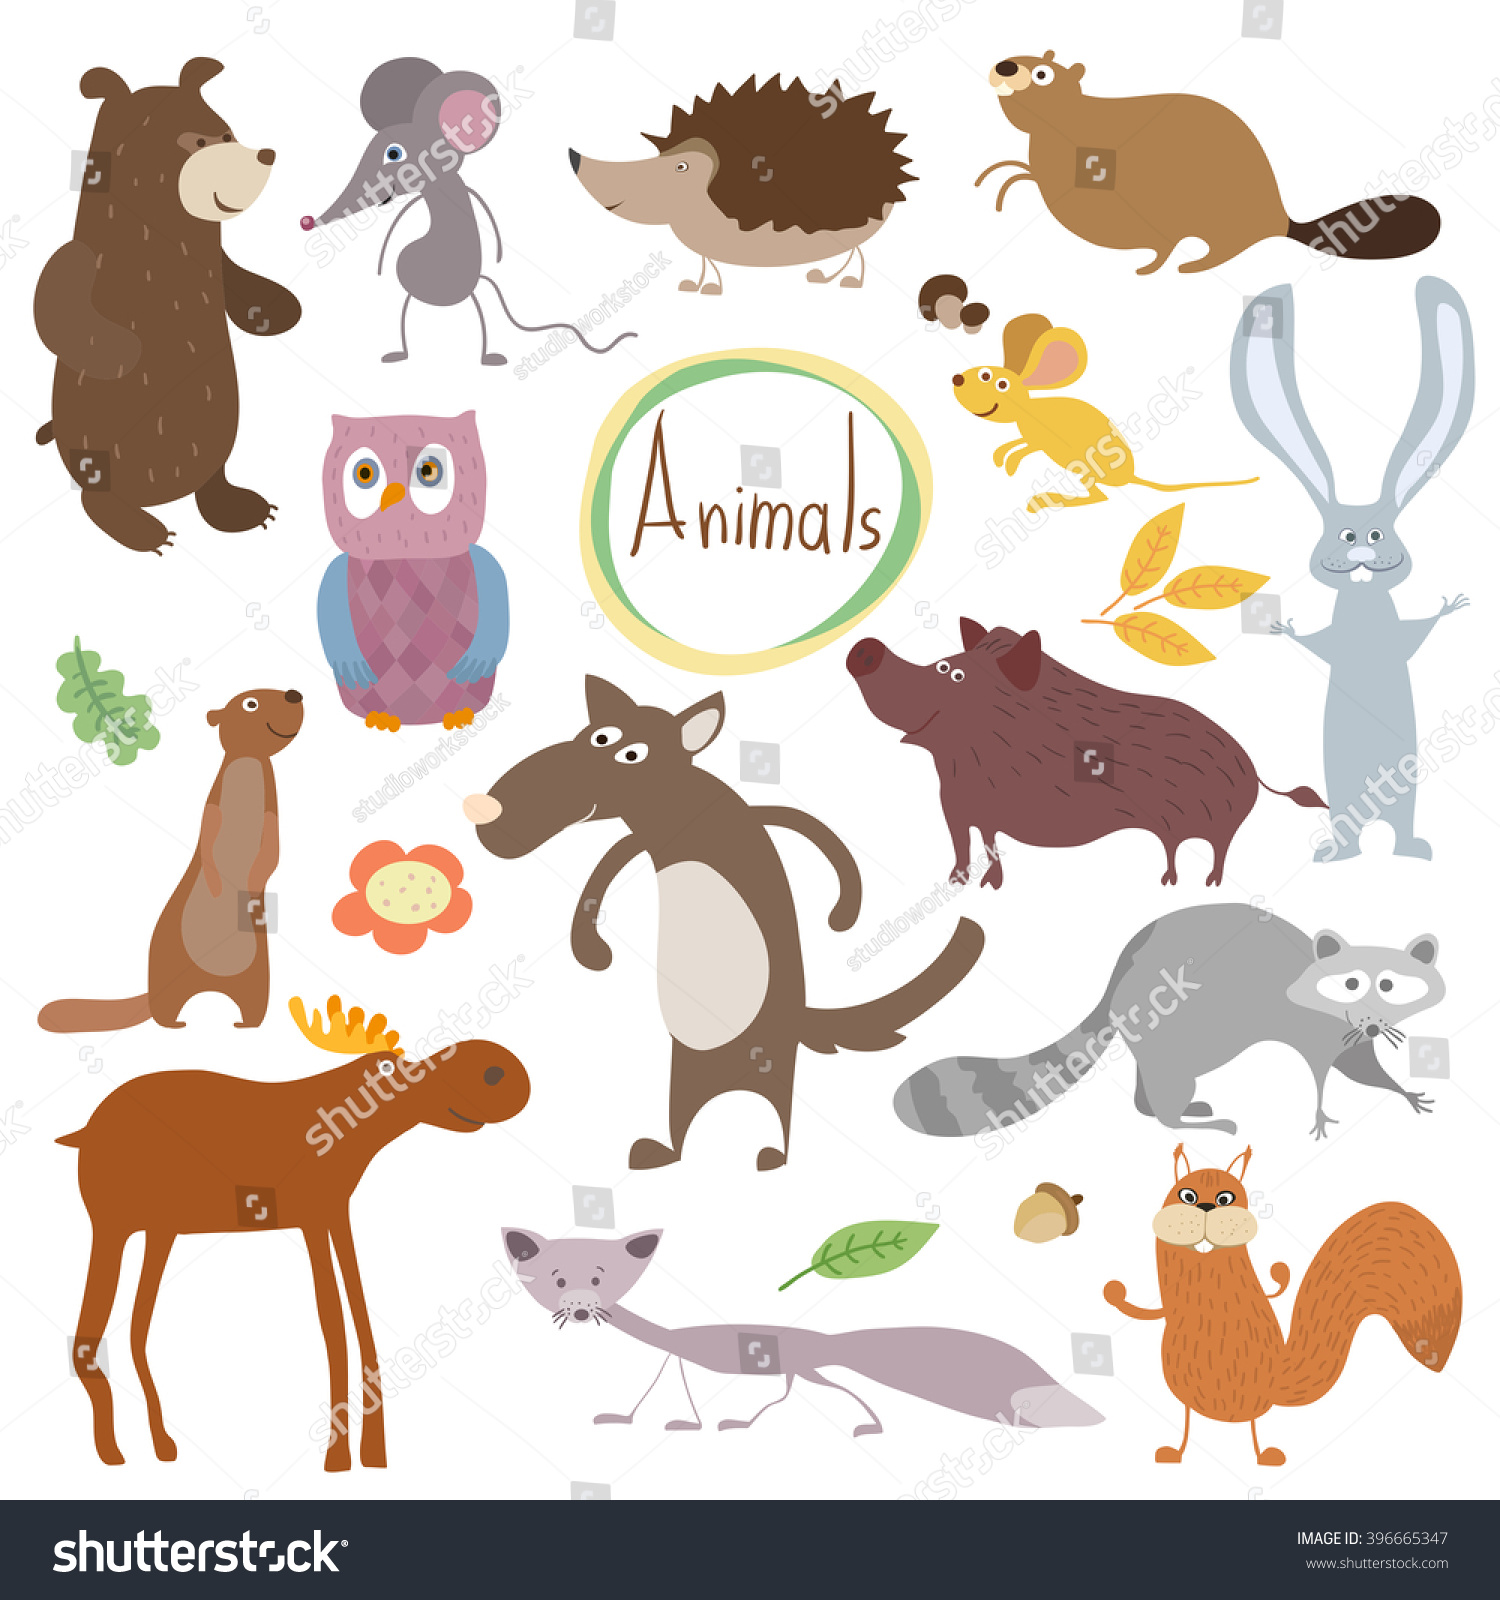 zoologist clipart - photo #22